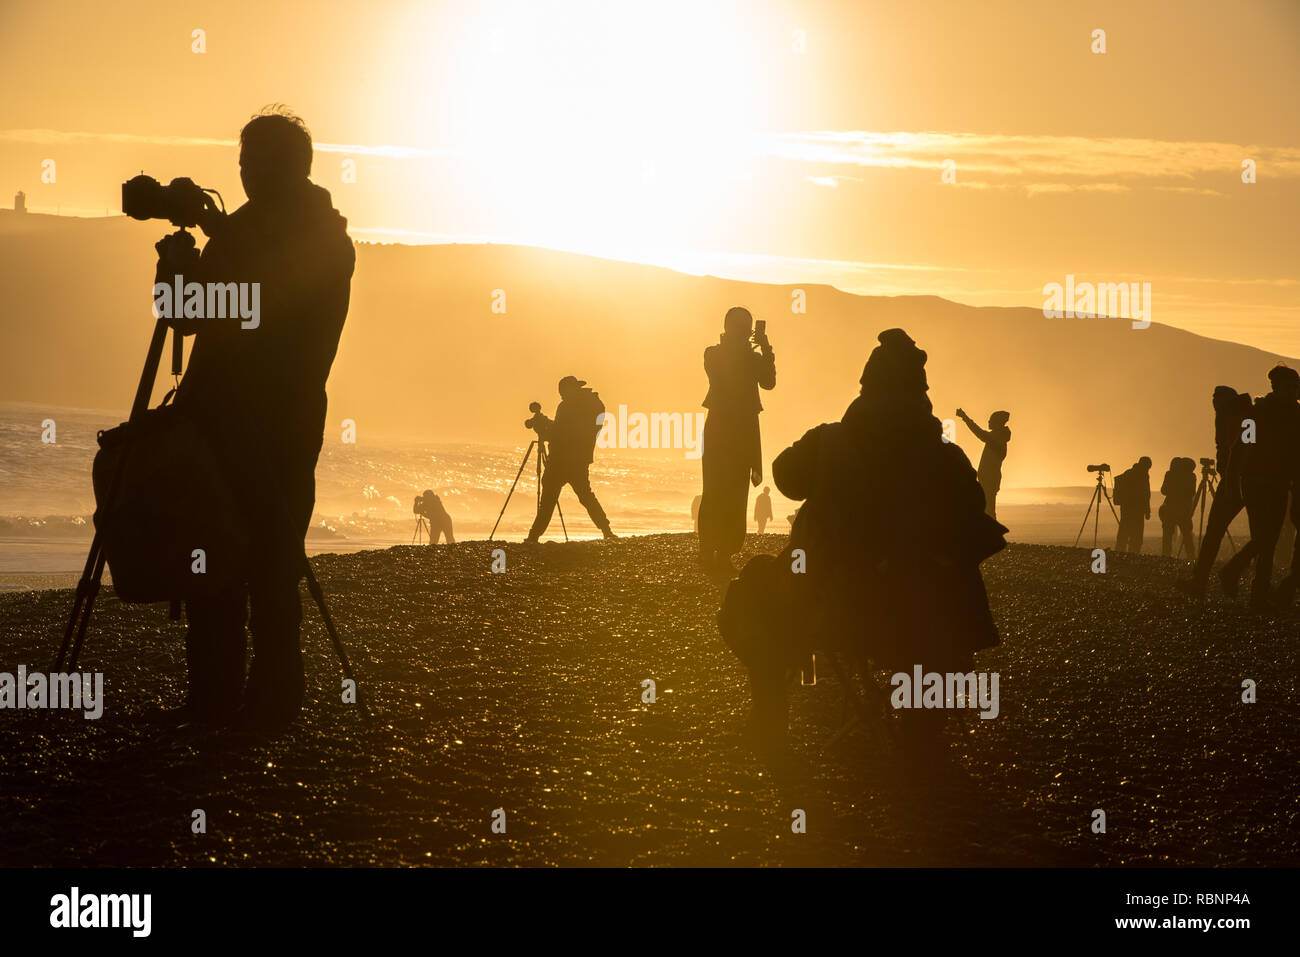 silhouettes of photographers on beach at sunset in golden light Stock Photo